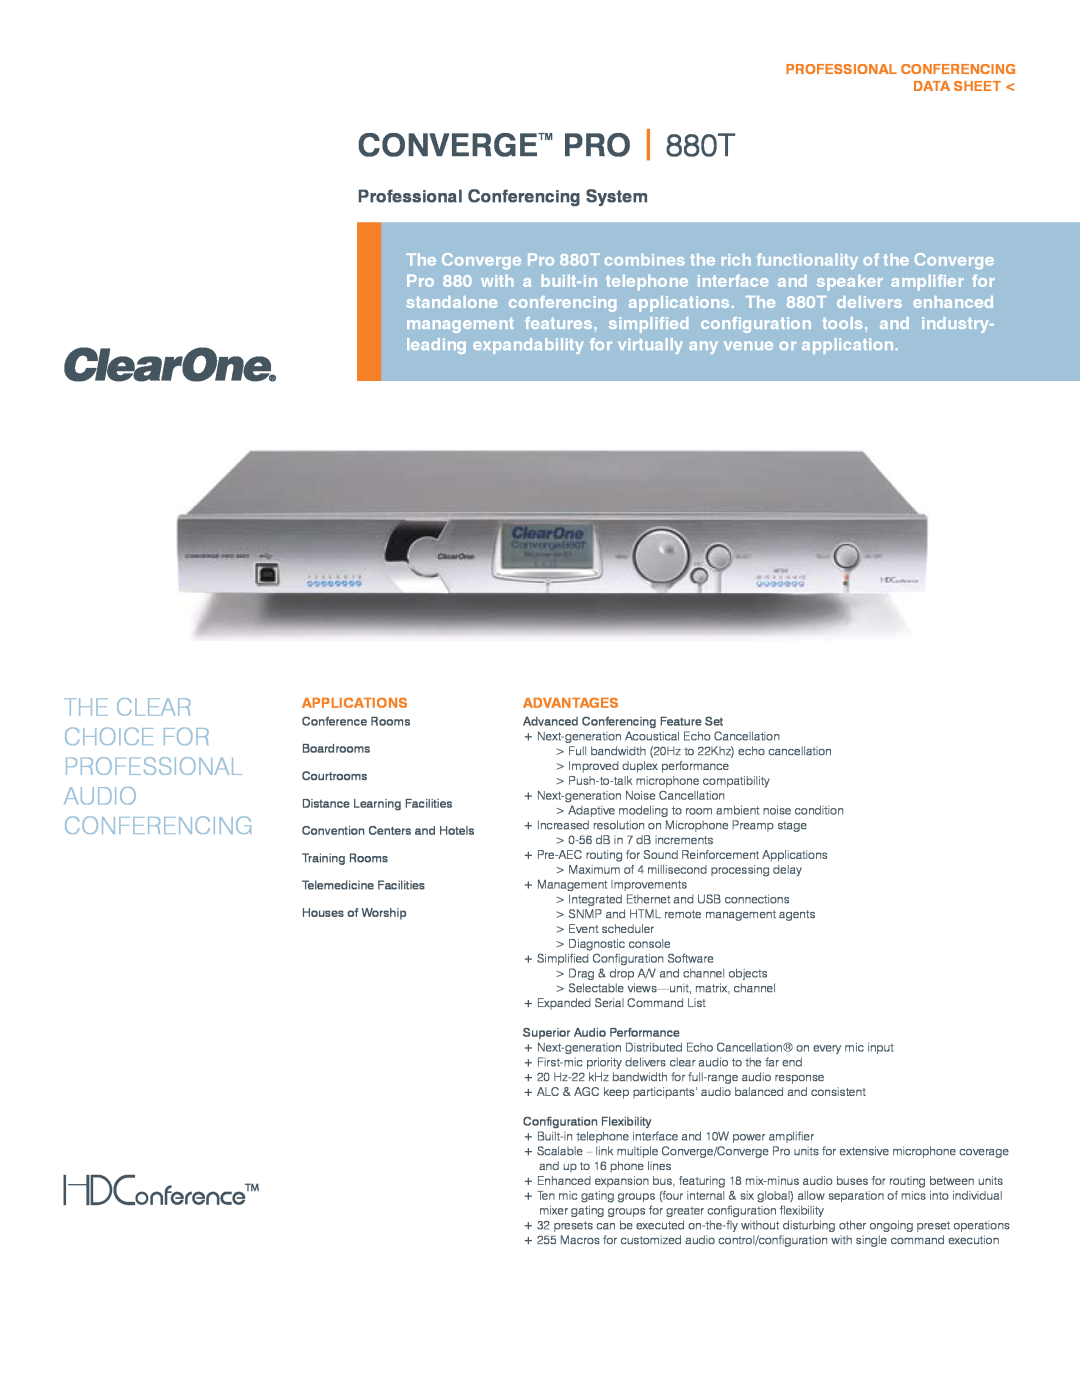 ClearOne comm manual Professional Conferencing Data Sheet, Applications, Advantages, CONVERGETM PRO 880T, The Clear 